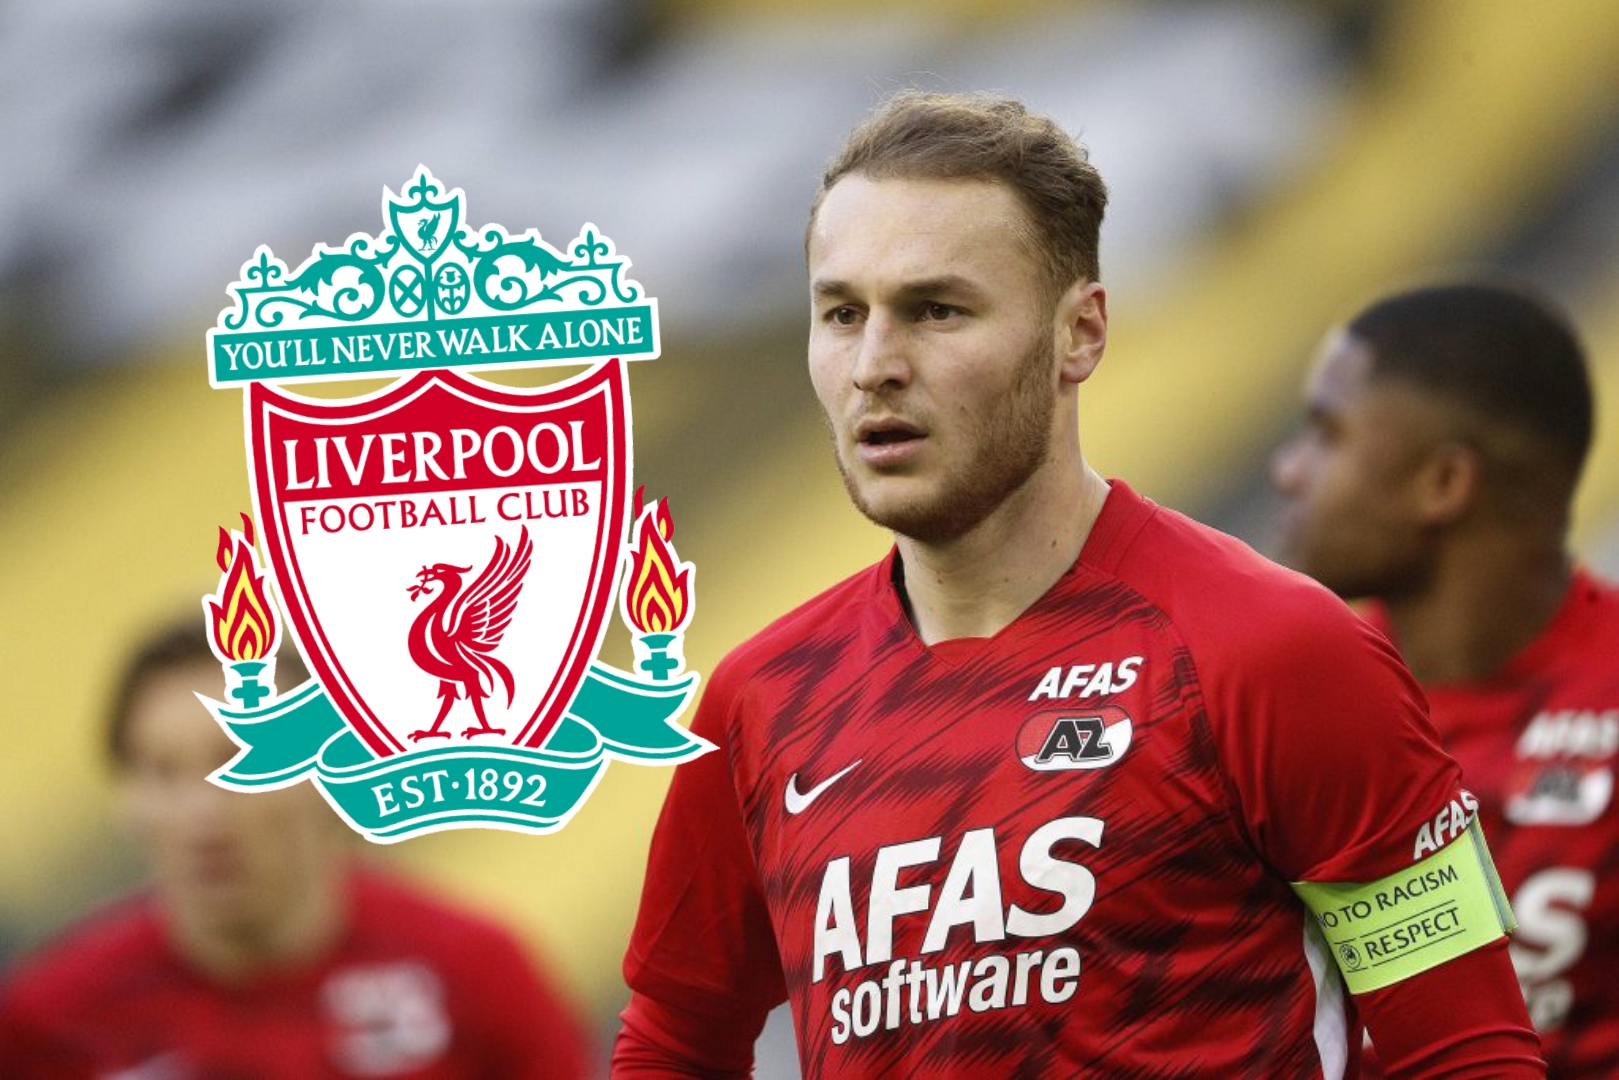 Reports: Liverpool now looking at signing long term 24-year-old midfield target who impressed Lionel Messi 1 Sportelo